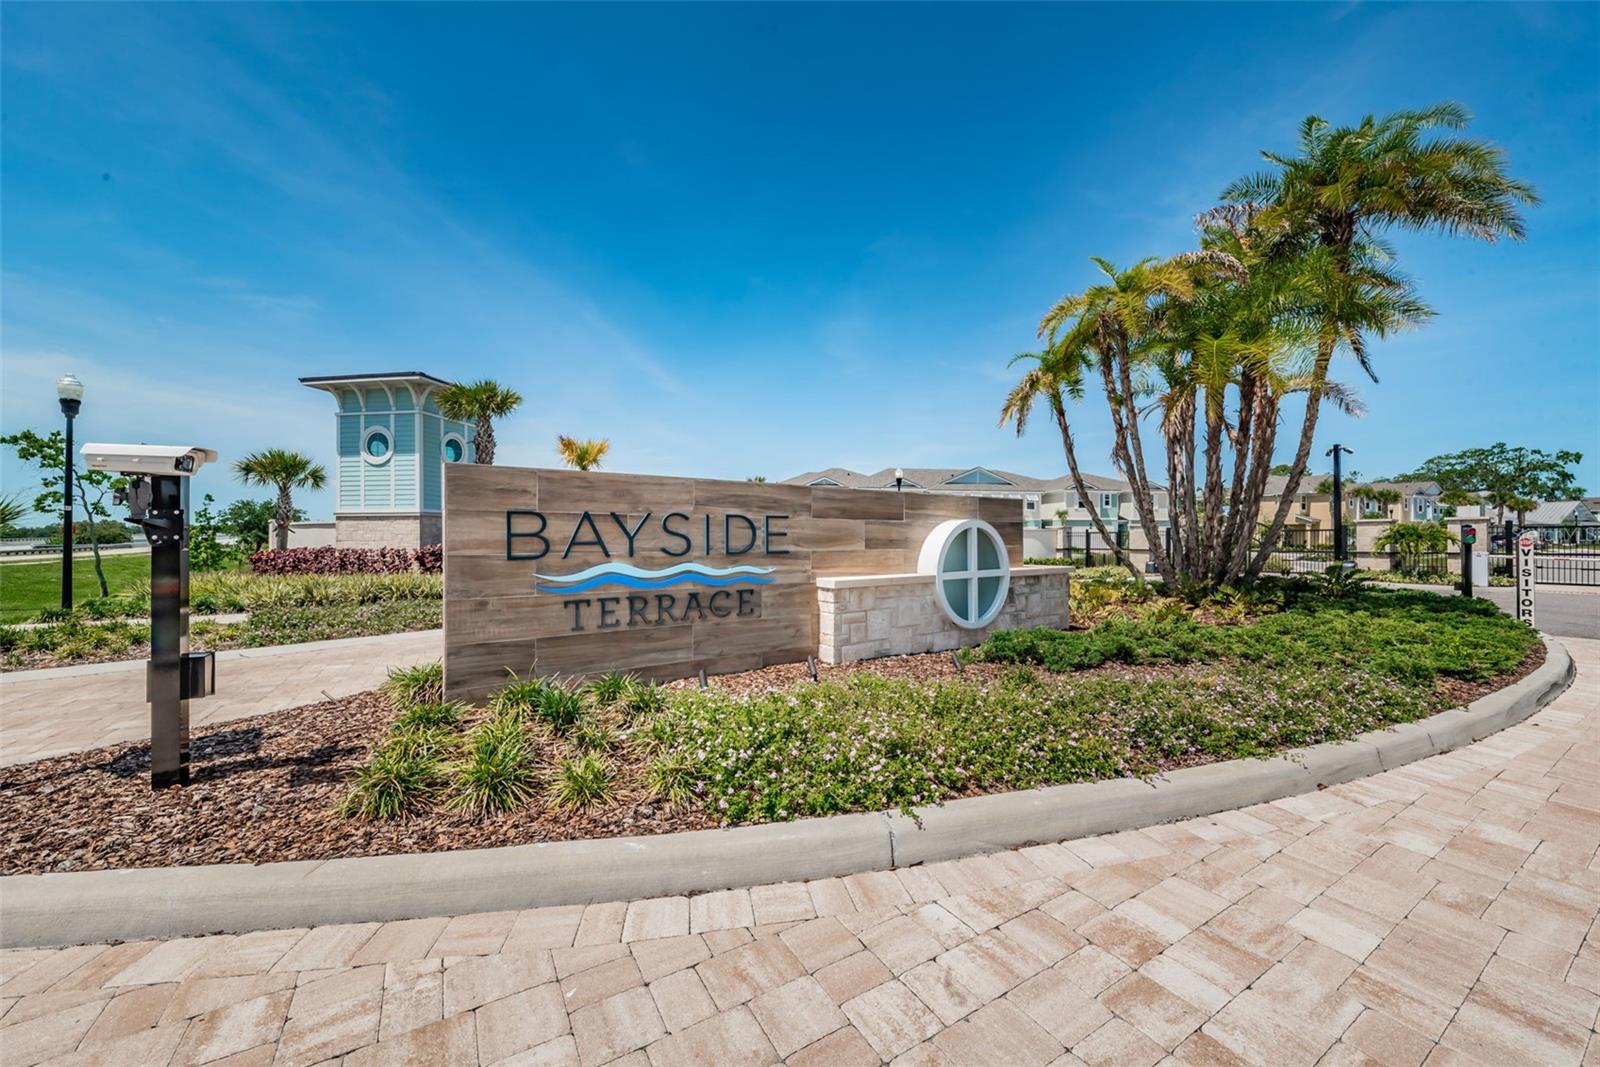 Bayside Terrace Gated Entry